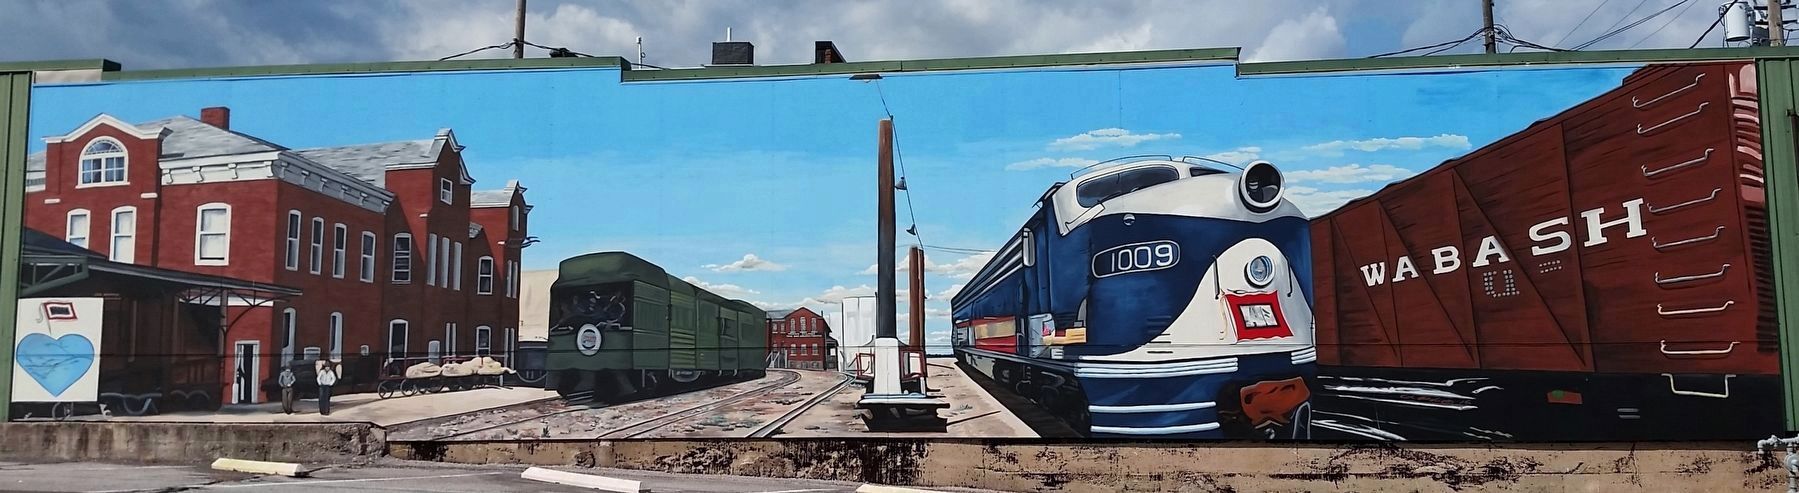 Moberly Railroad Depot Mural (<i>across street from the marker</i>) image. Click for full size.